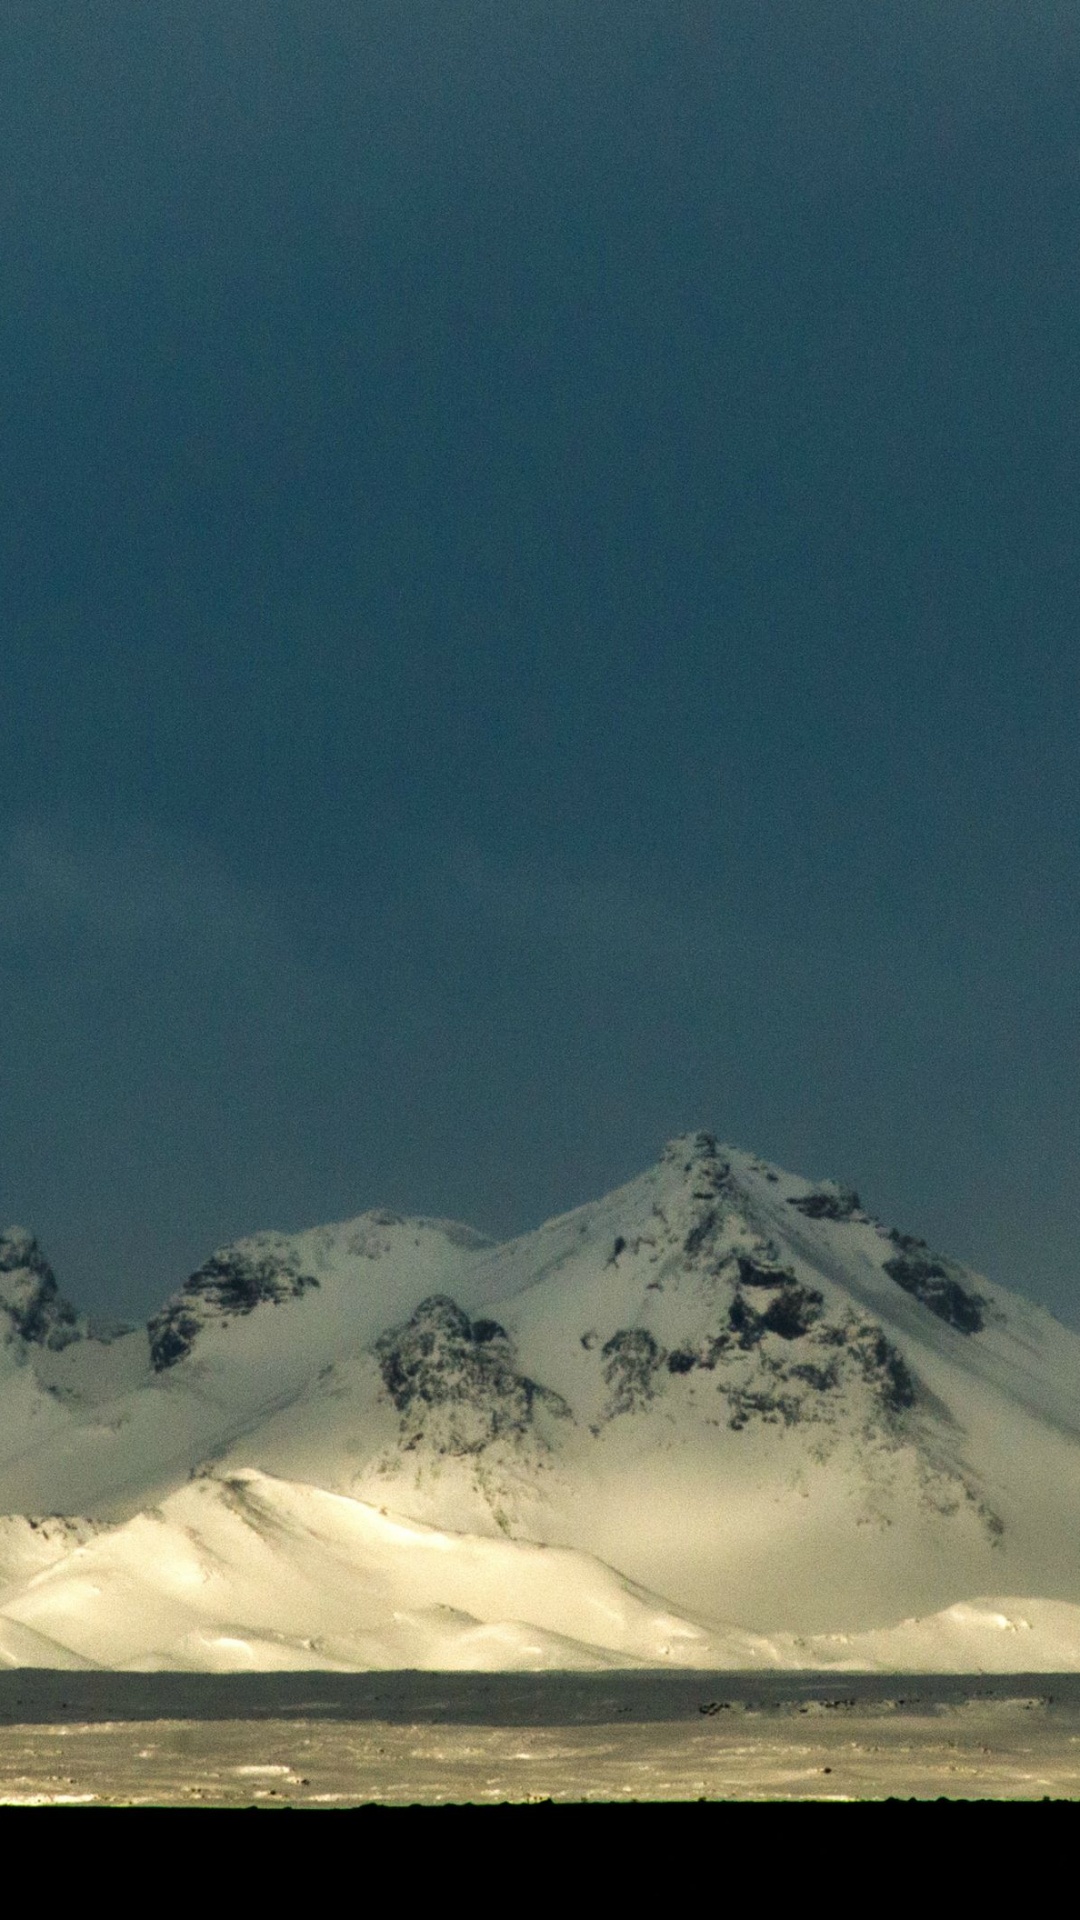 Snow Covered Mountain Under Blue Sky During Daytime. Wallpaper in 1080x1920 Resolution